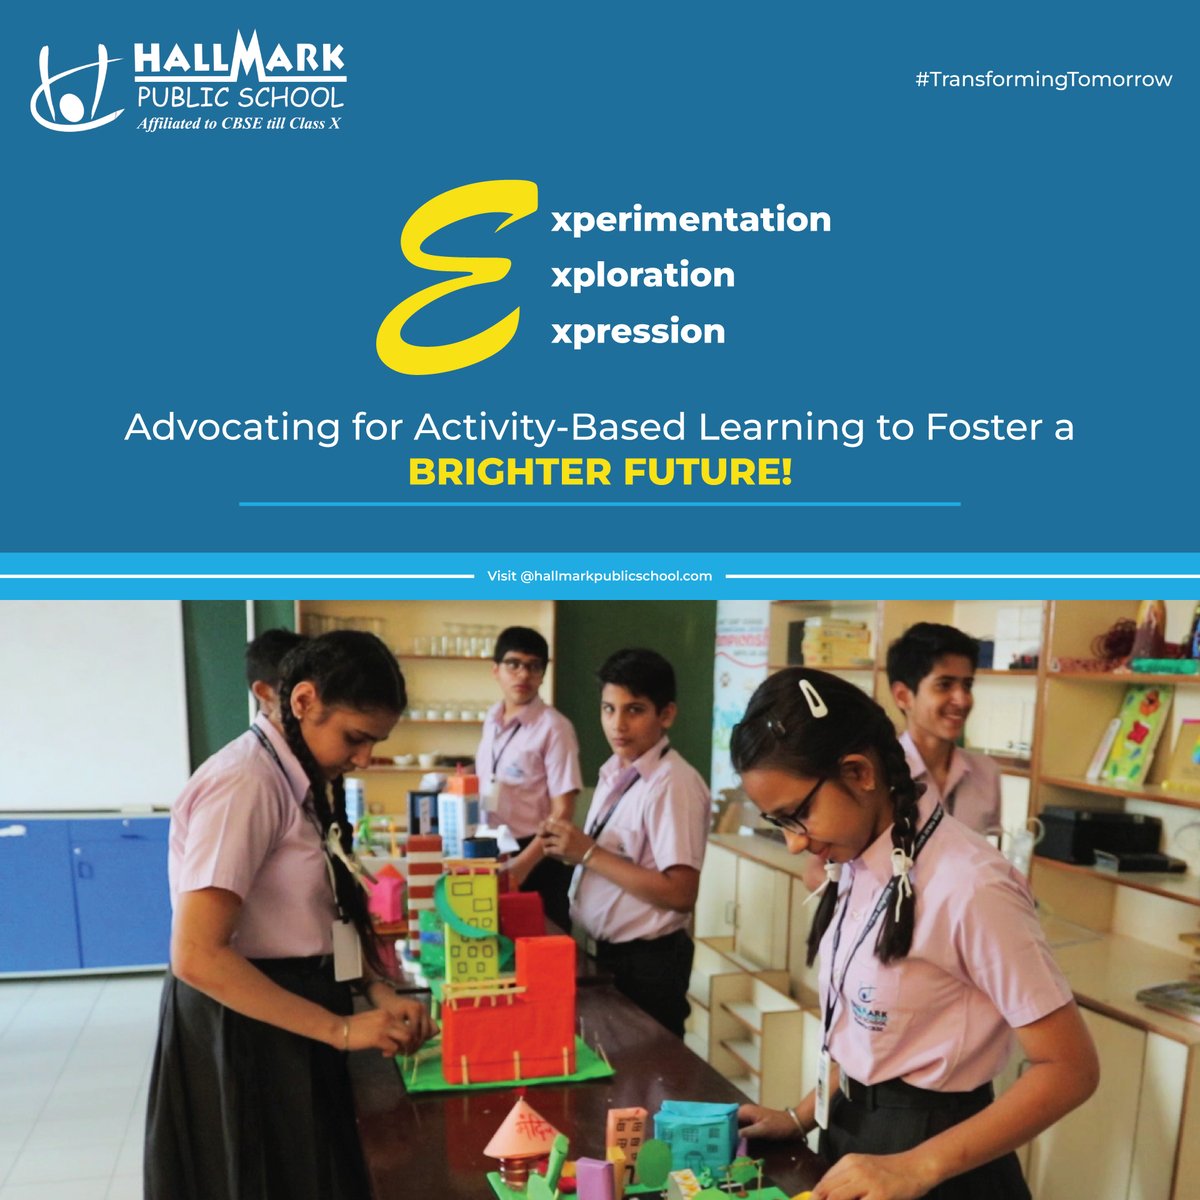 Our commitment to fostering experimentation, exploration  and expression is equipping our students with the skills necessary to excel in a rapidly changing world. 

#ActivityBasedLearning #BrighterFuture #HallmarkPublicSchool #LifelongLearning #CBSESchoolInPanchkula #Education